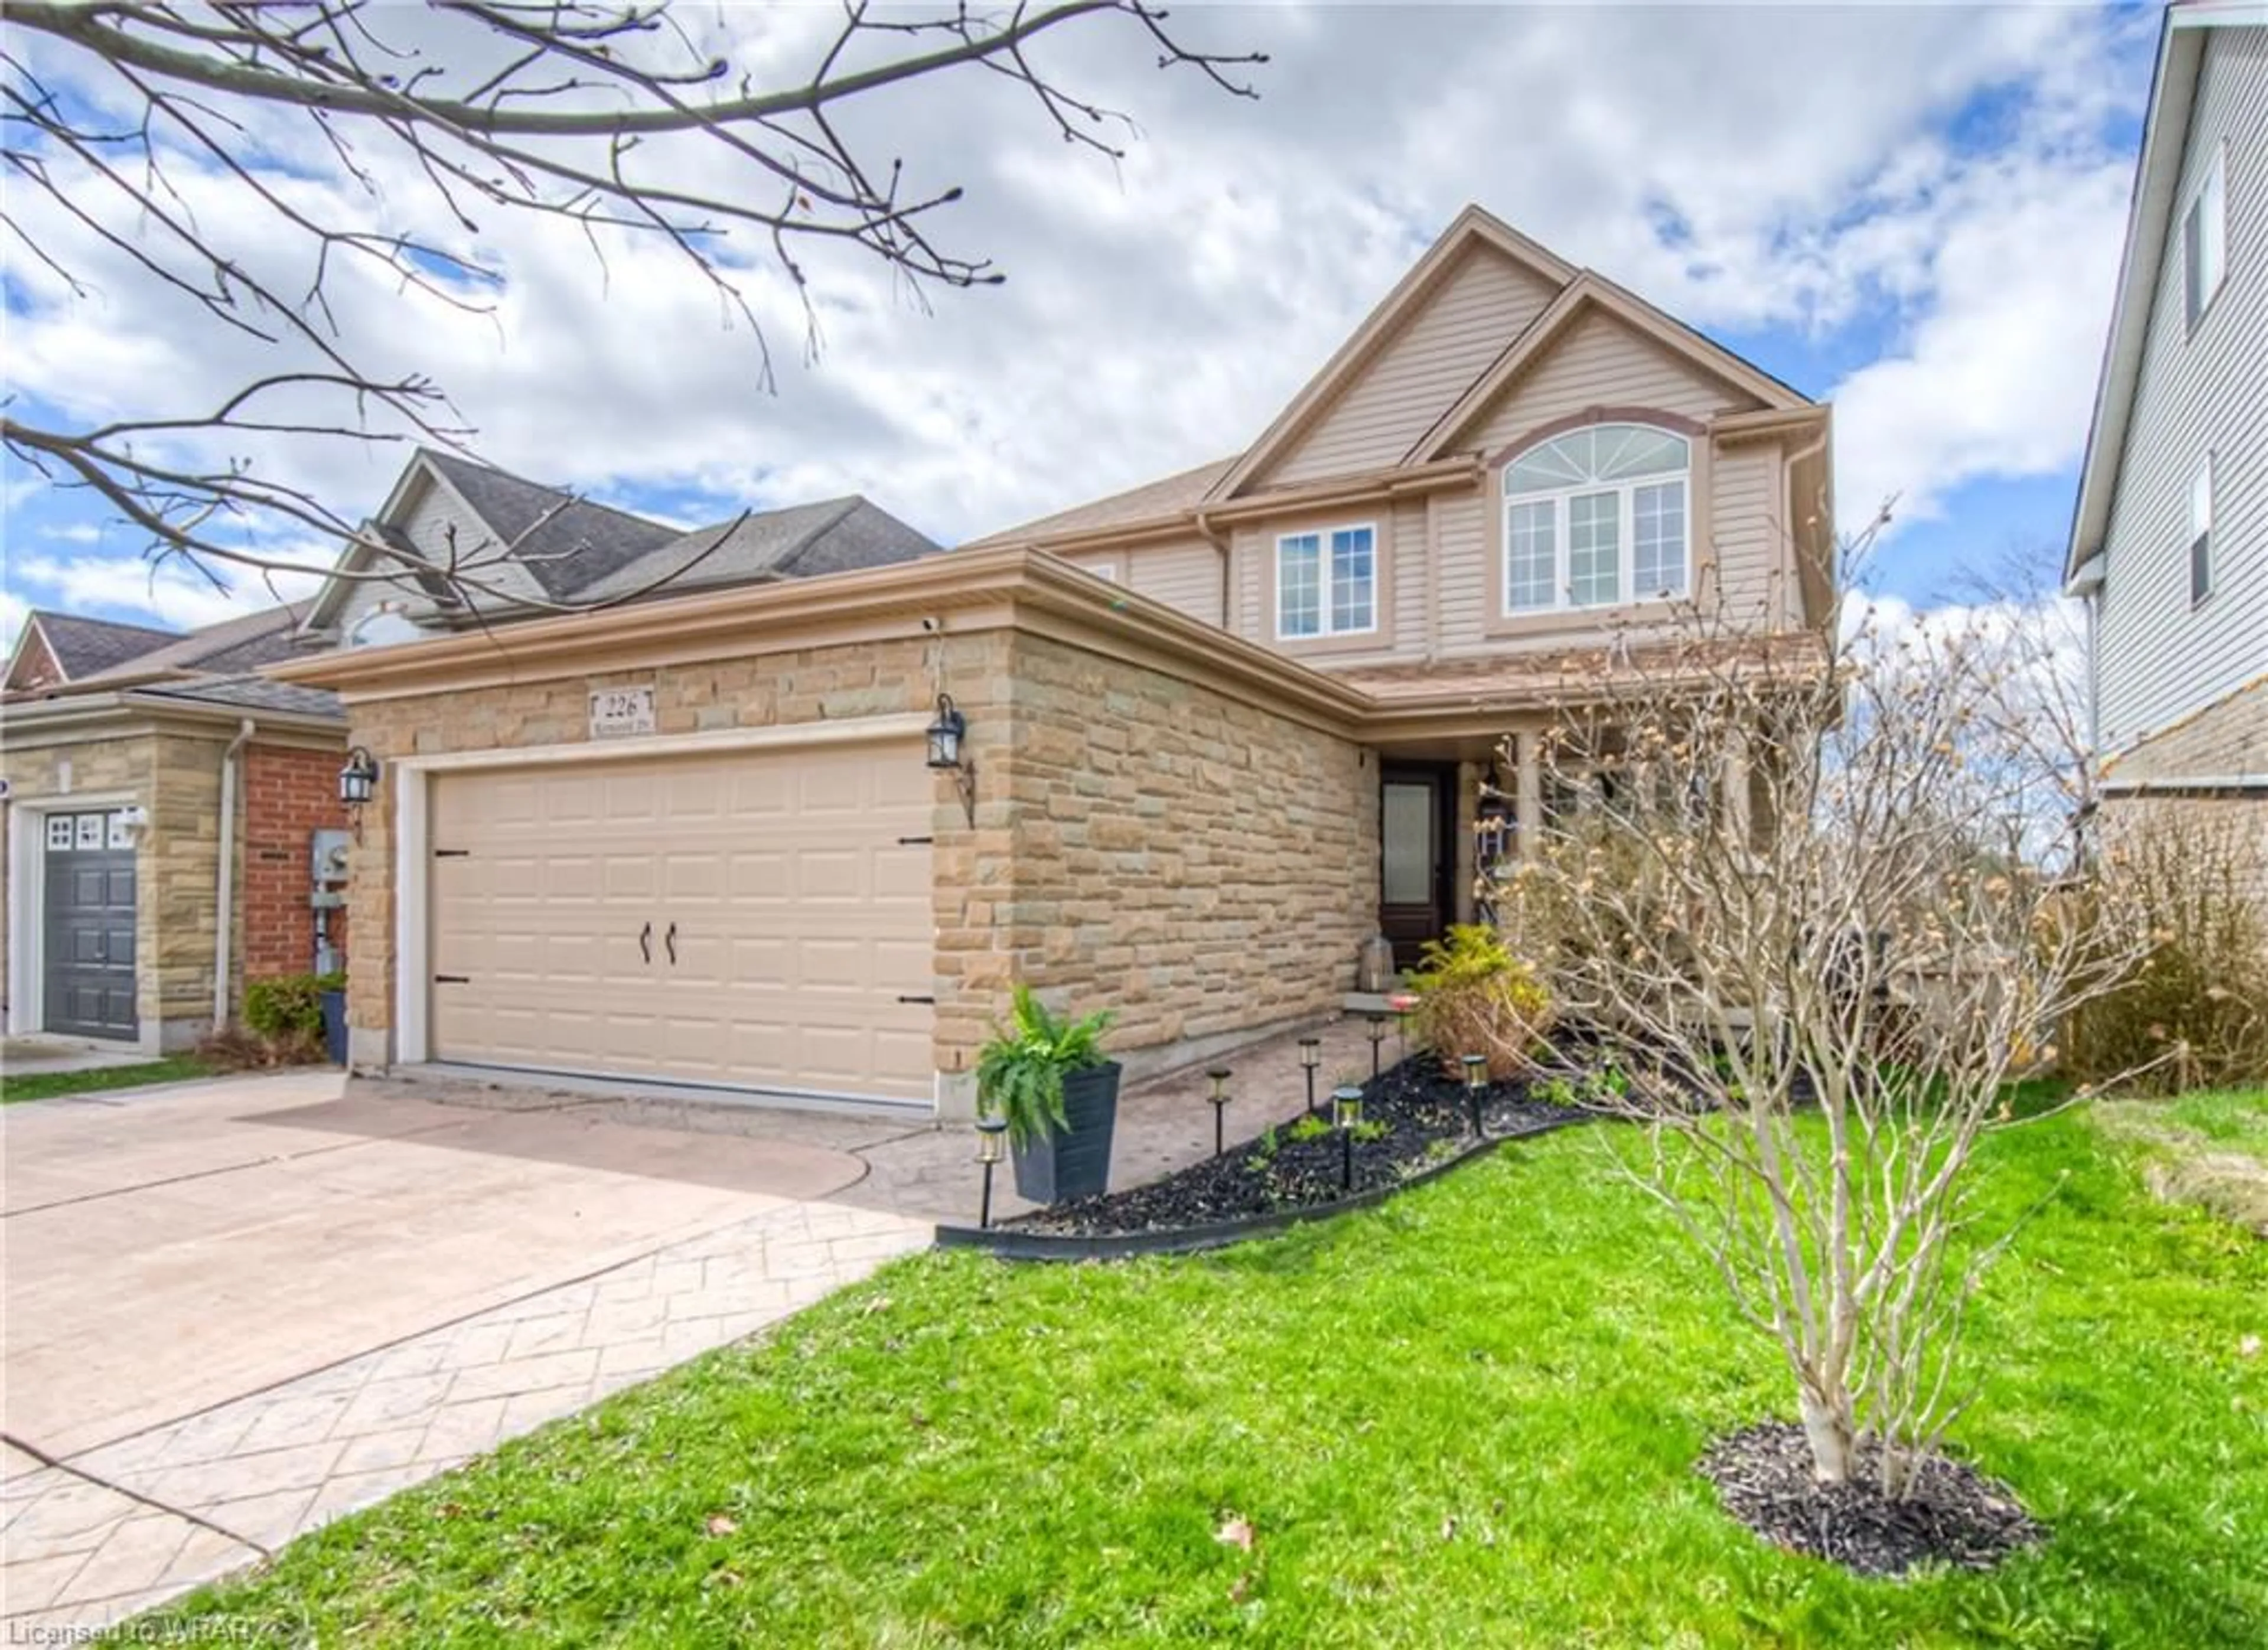 Home with brick exterior material for 226 Kerwood Dr, Cambridge Ontario N3C 4M6